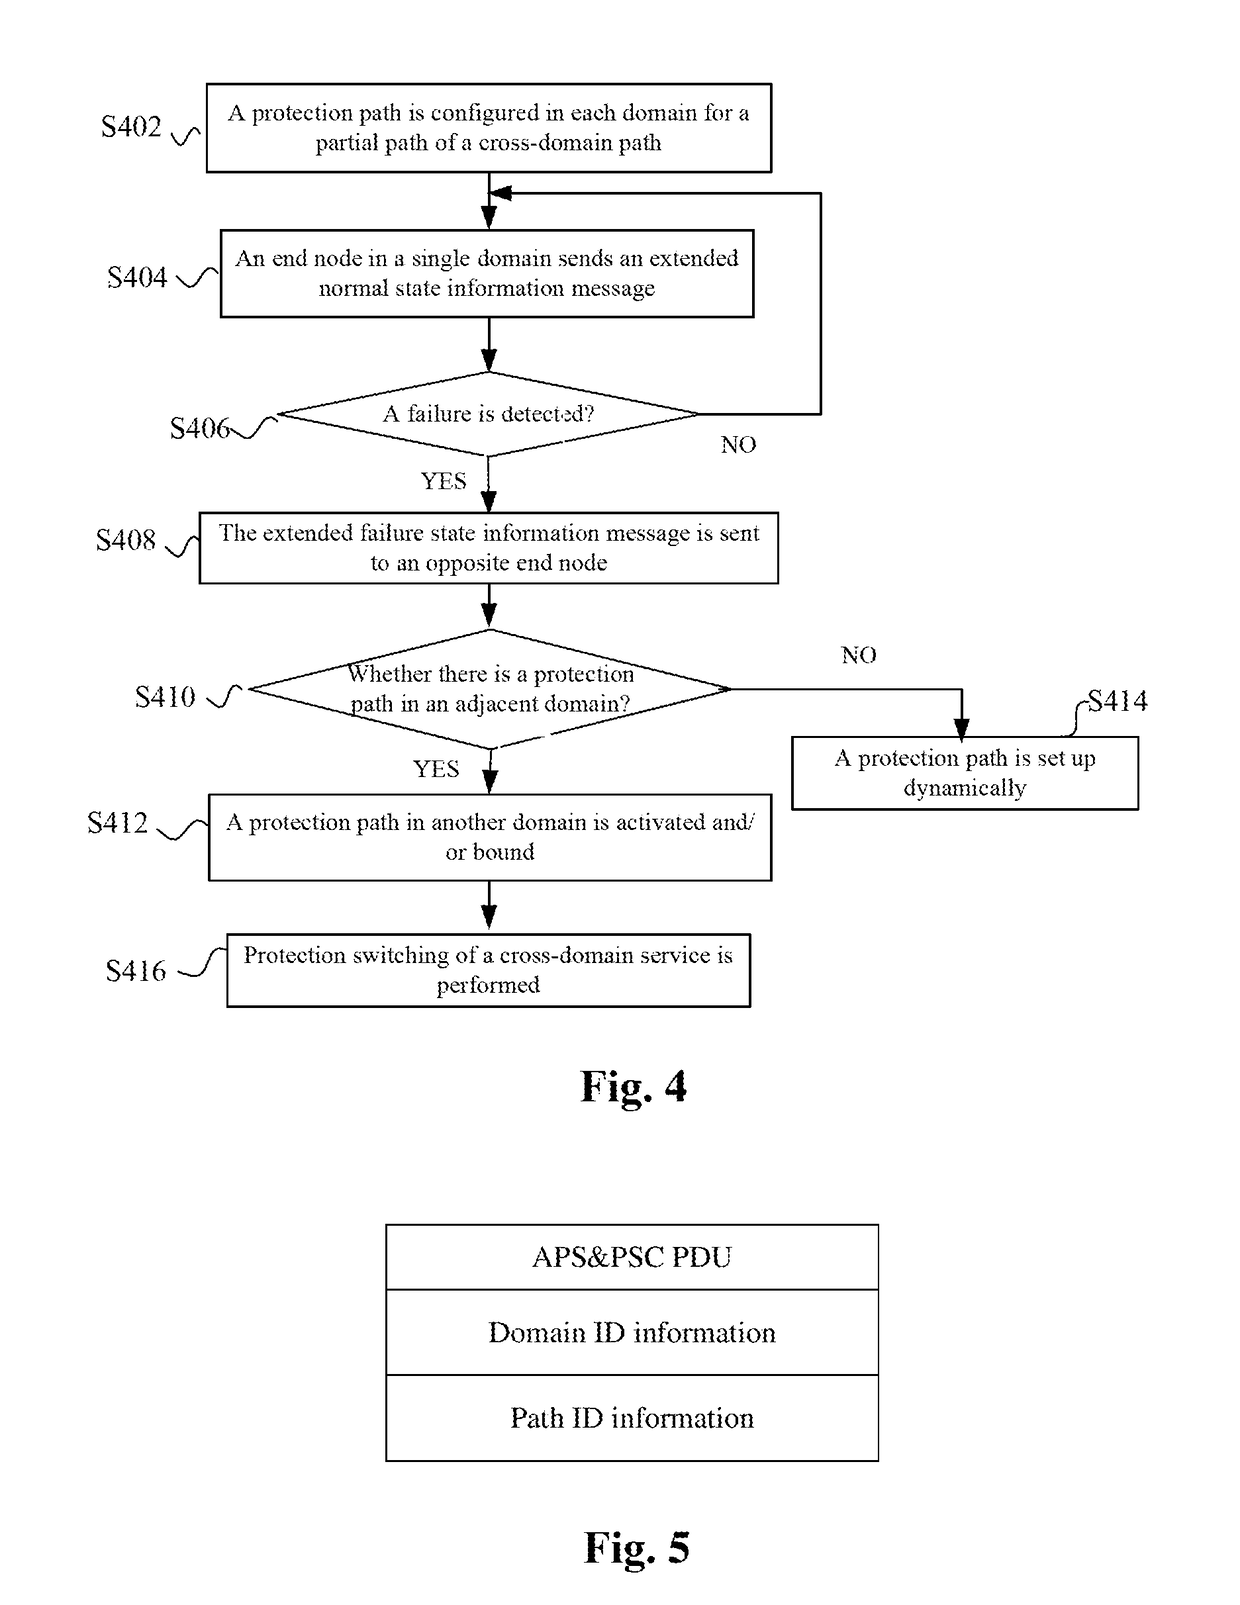 Cross-domain protection interacting method and system